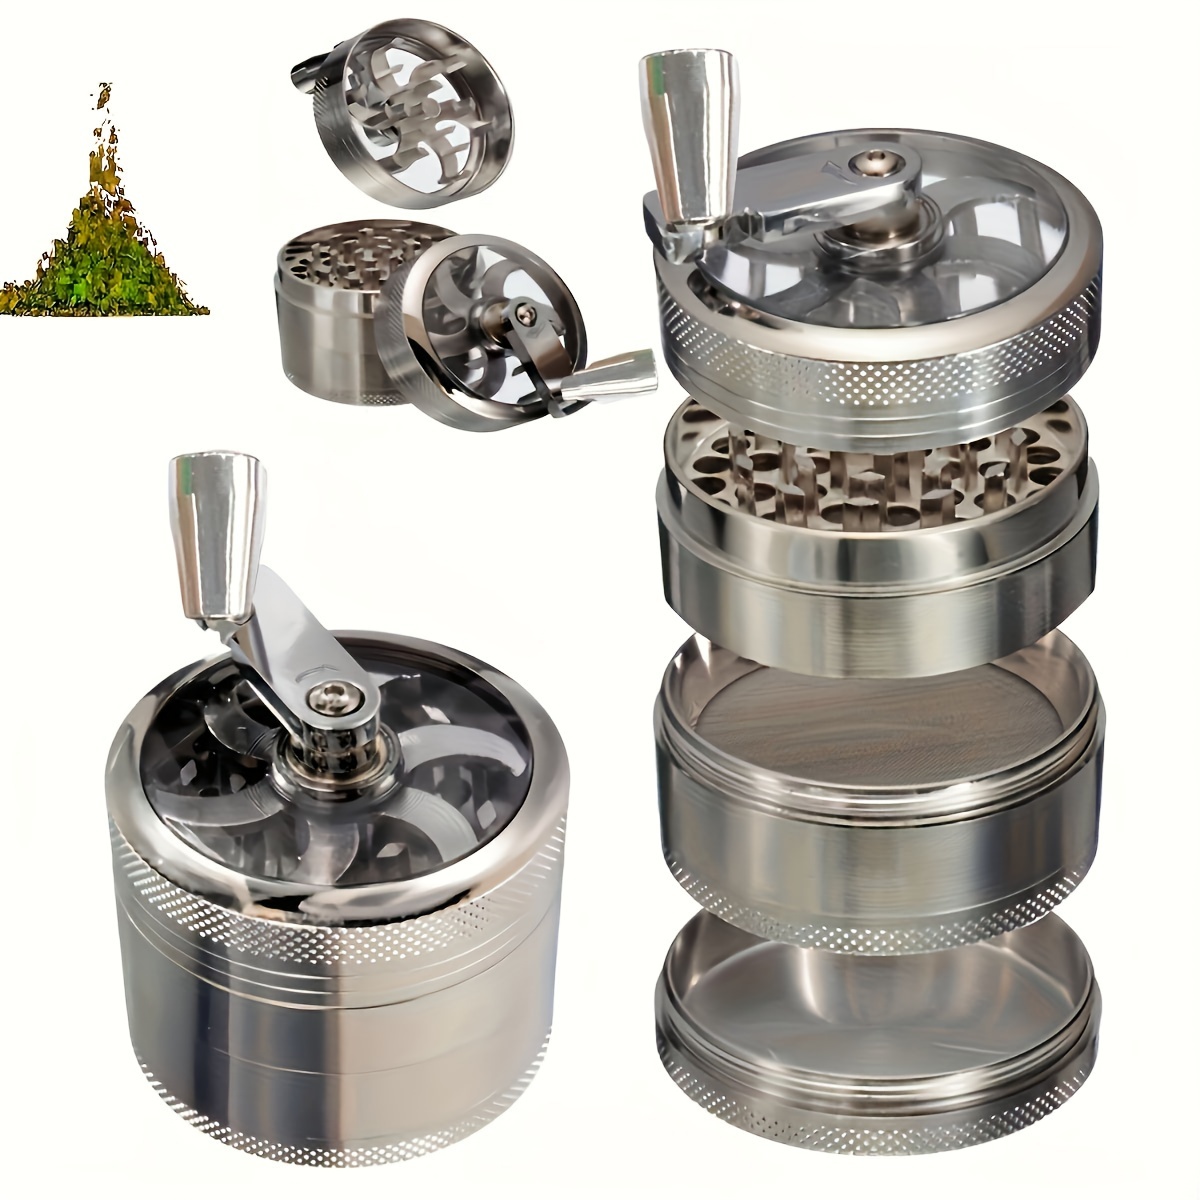 Nut Grinders, Spice Grinders & Spice Infusers